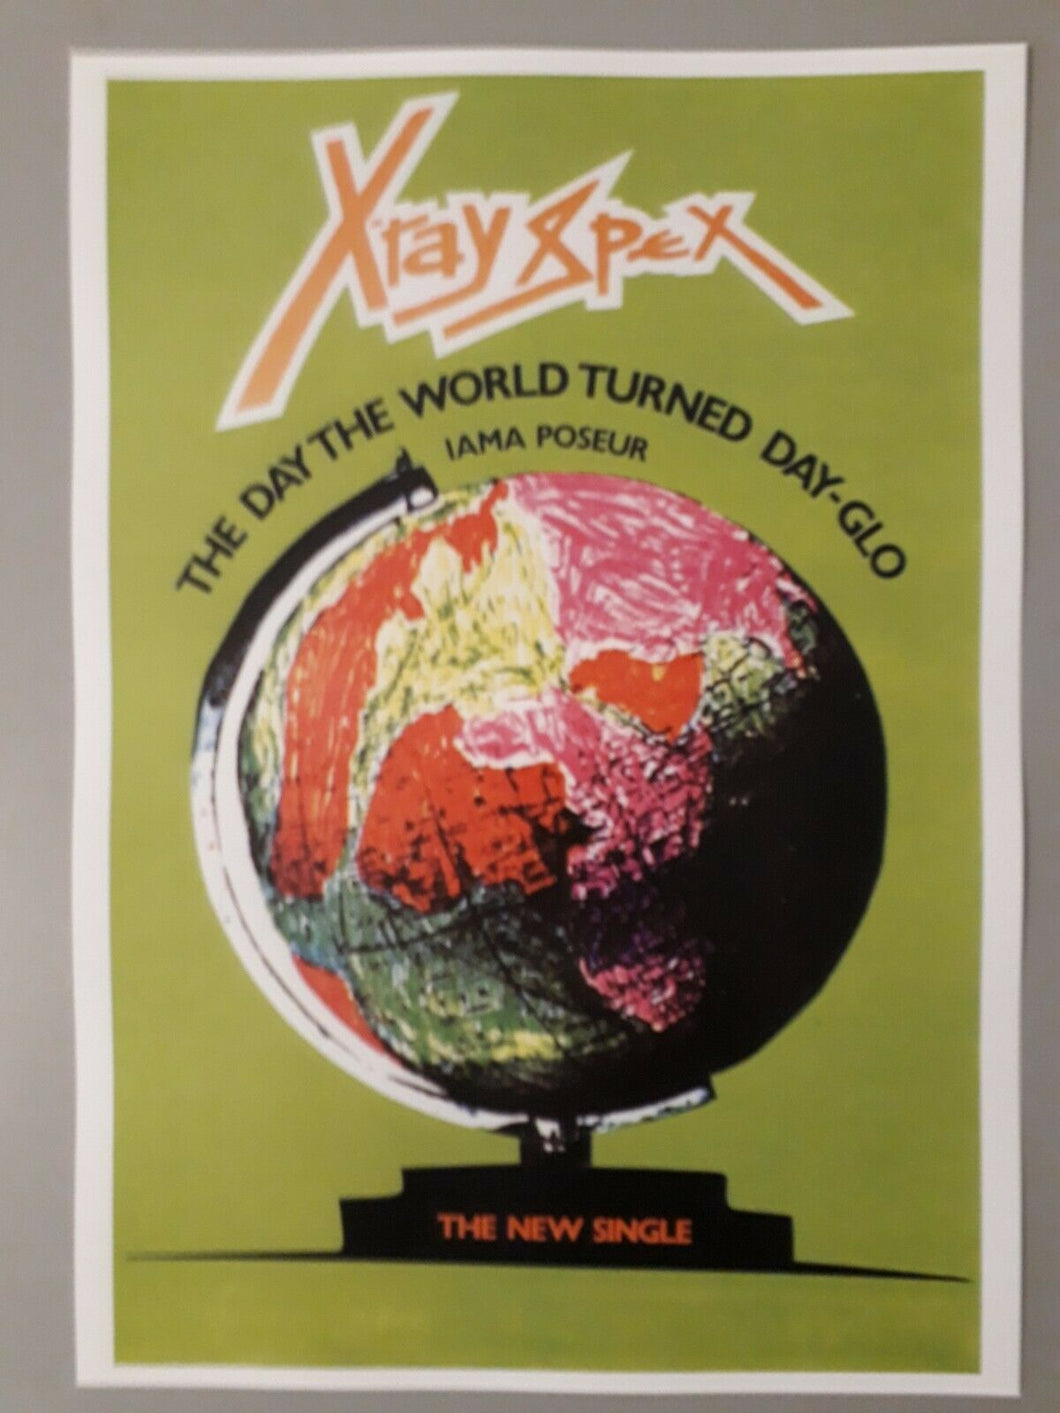 XRay Spex poster - Day the World Turned Dayglo promotional release 78 A3 reprint - Original Music and Movie Posters for sale from Bamalama - Online Poster Store UK London